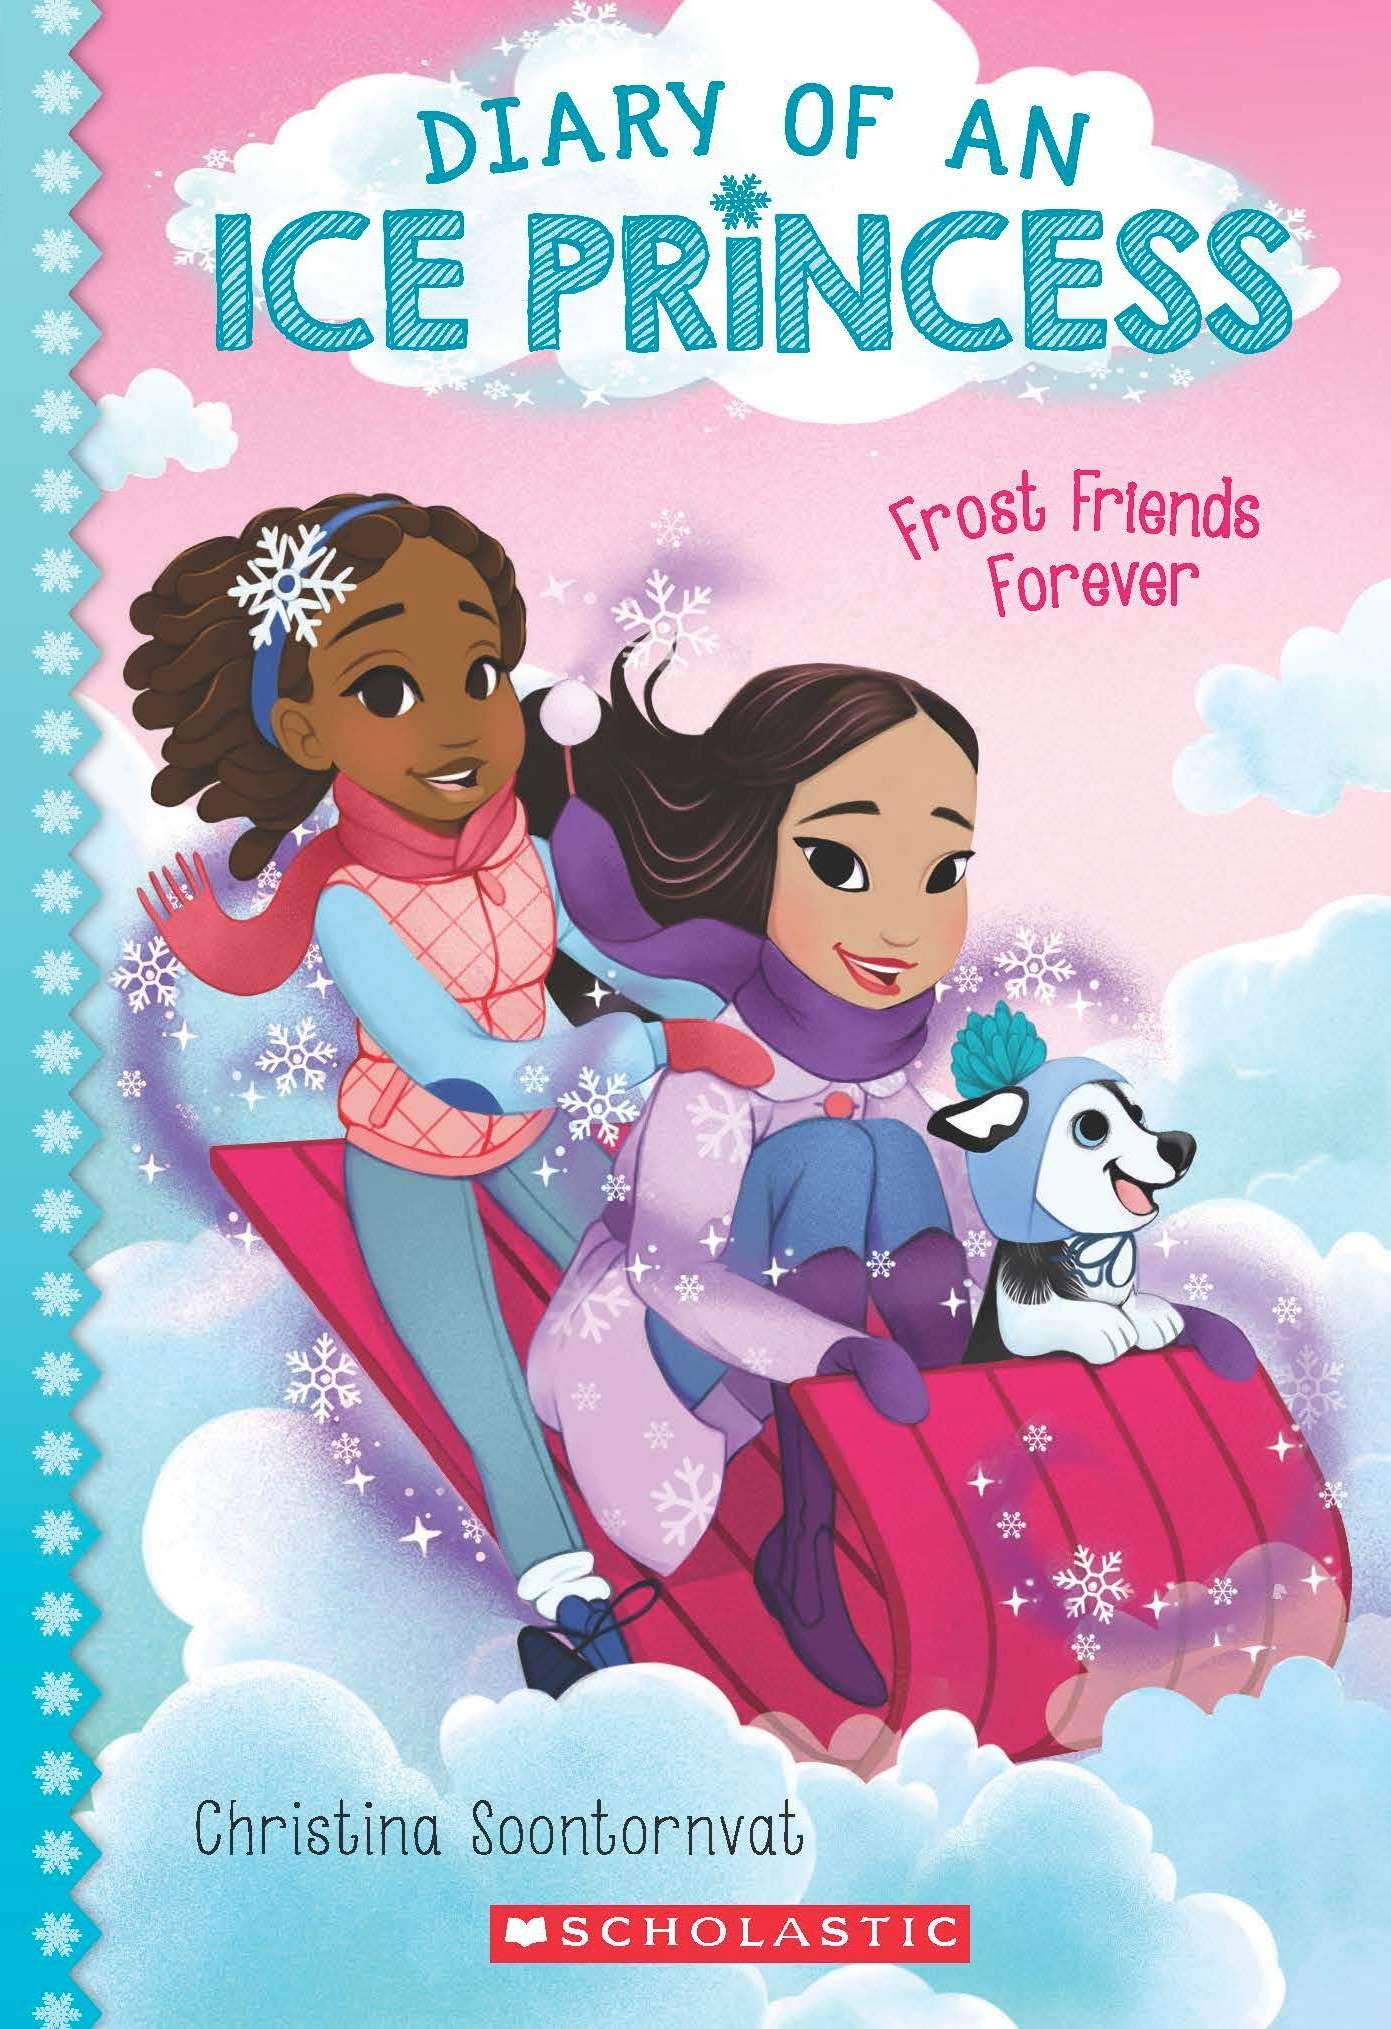 IMG : Diary of an Ice Princess# 2 Frost Friends Forever